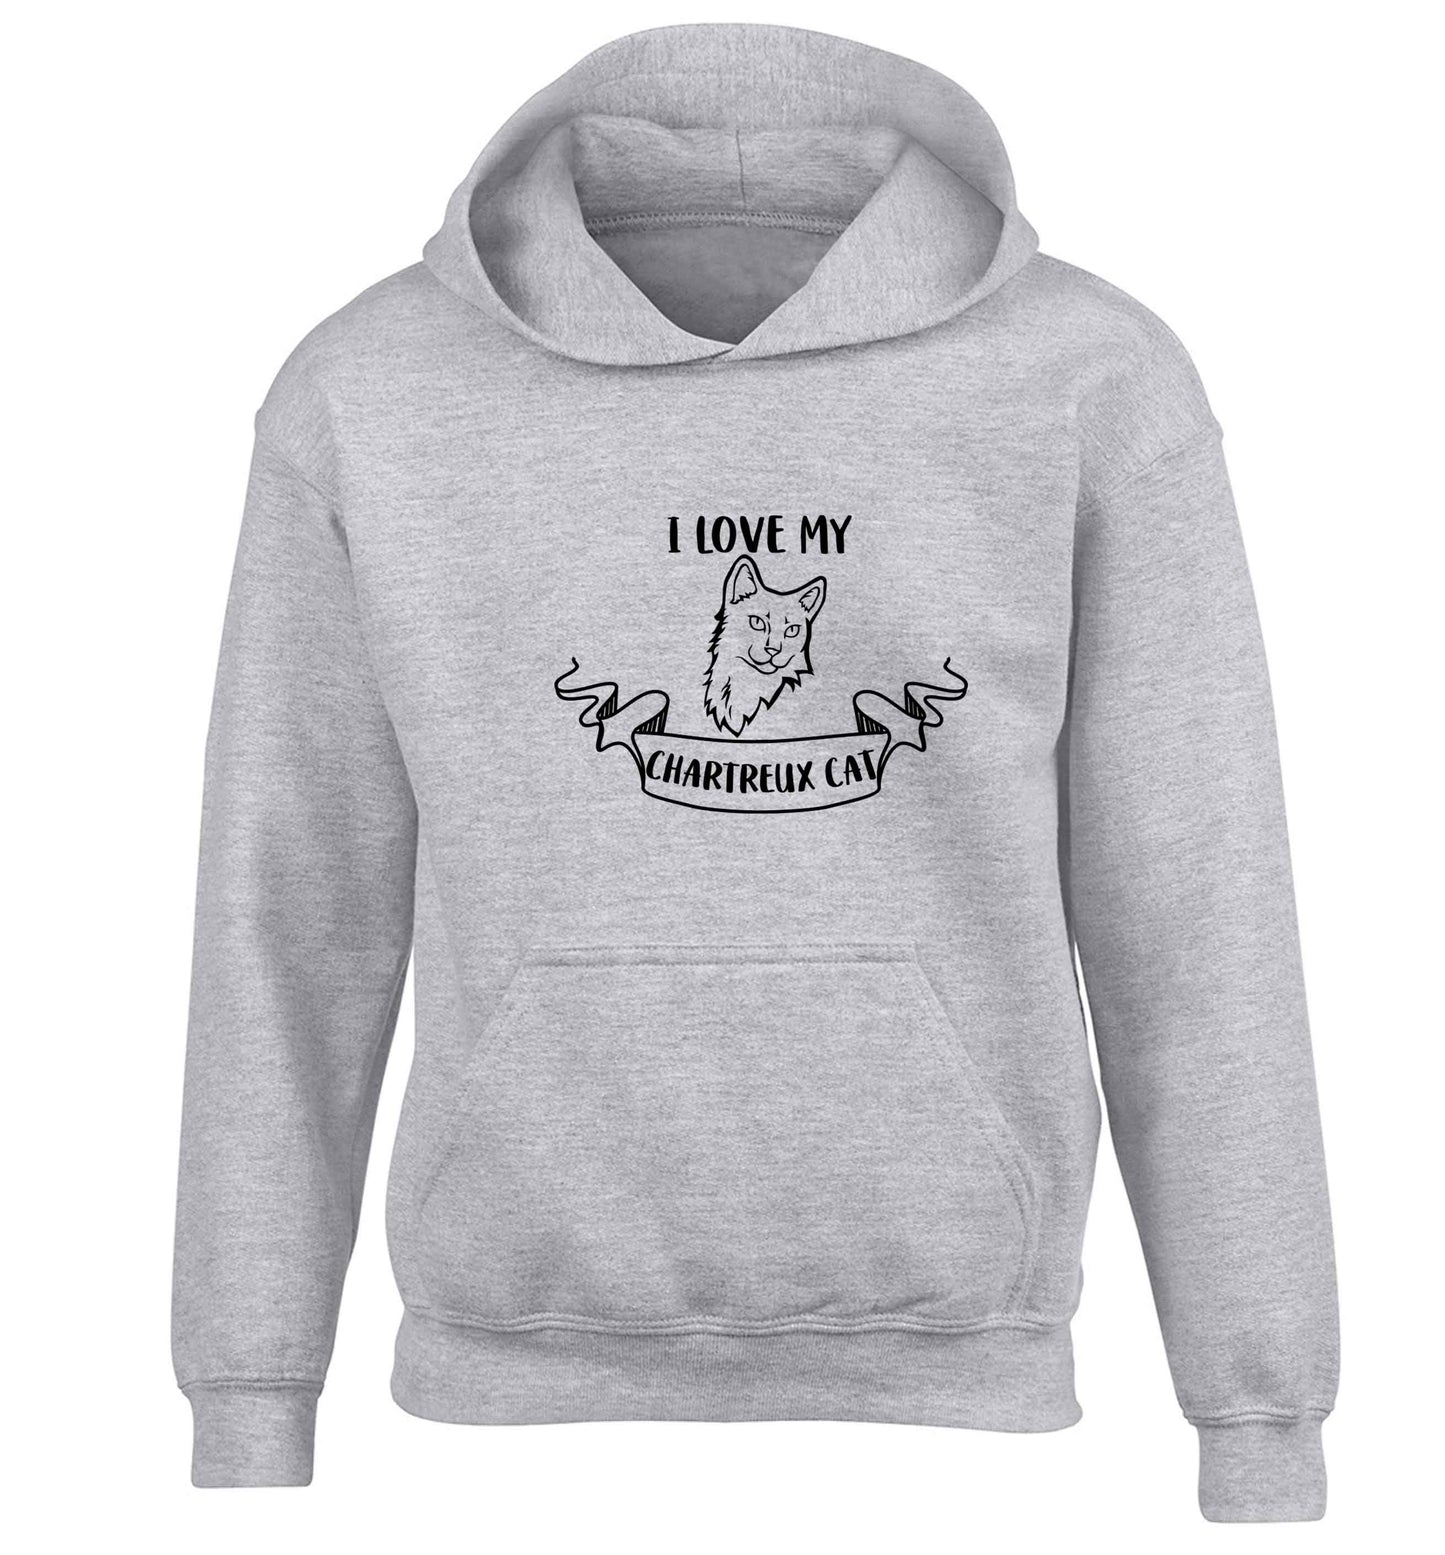 I love my chartreux cat children's grey hoodie 12-13 Years